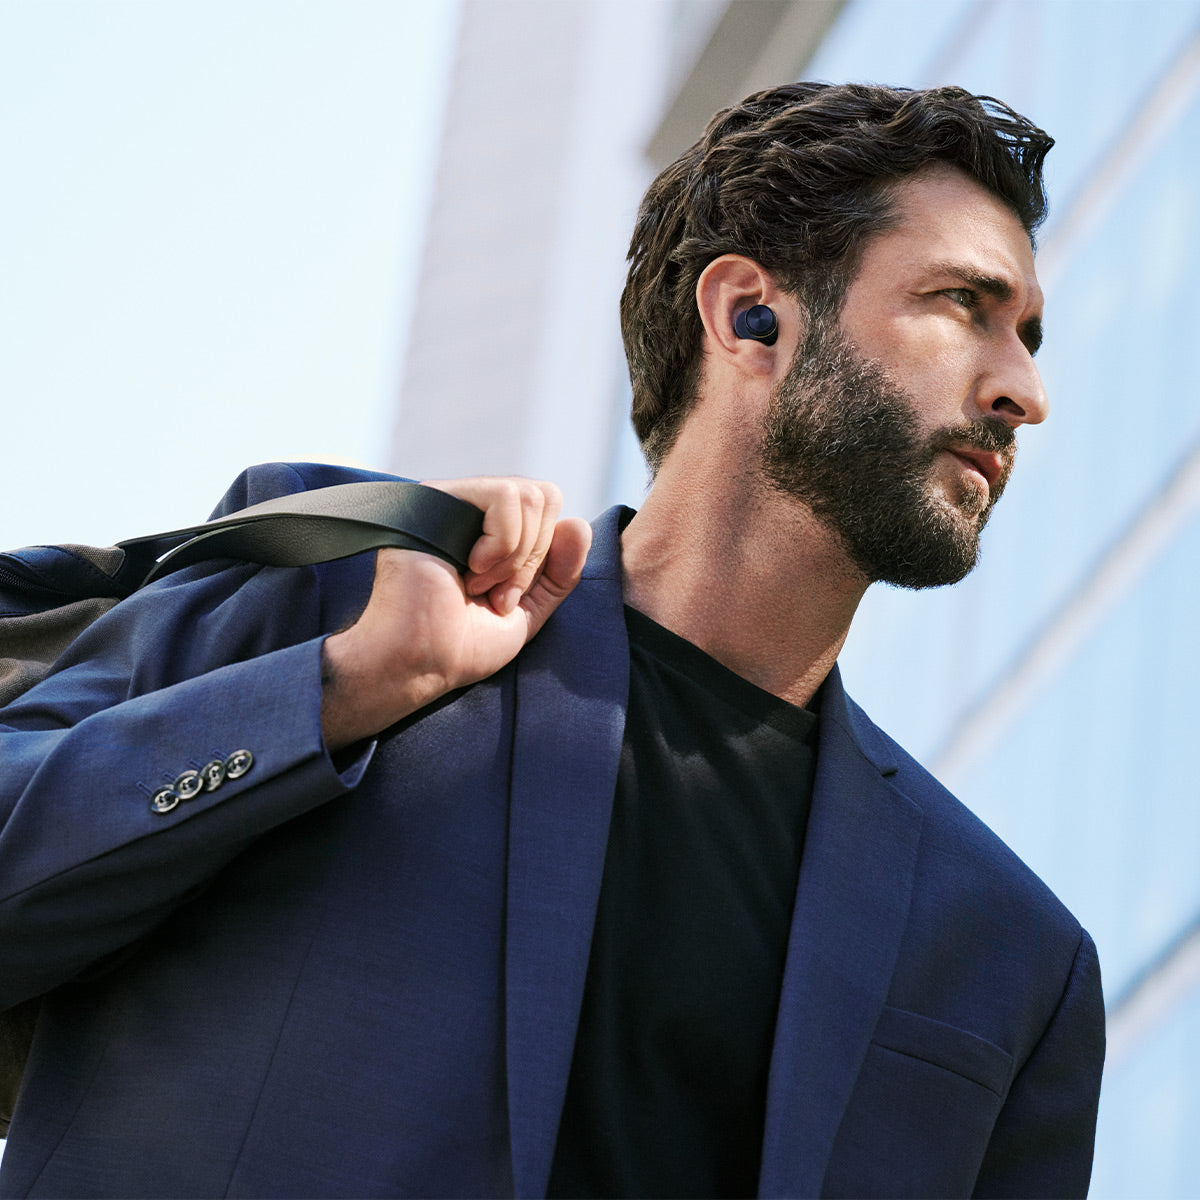 Bowers & Wilkins Pi7 True Wireless In-Ear Headphones with Active Noise Cancellation (Midnight Blue)